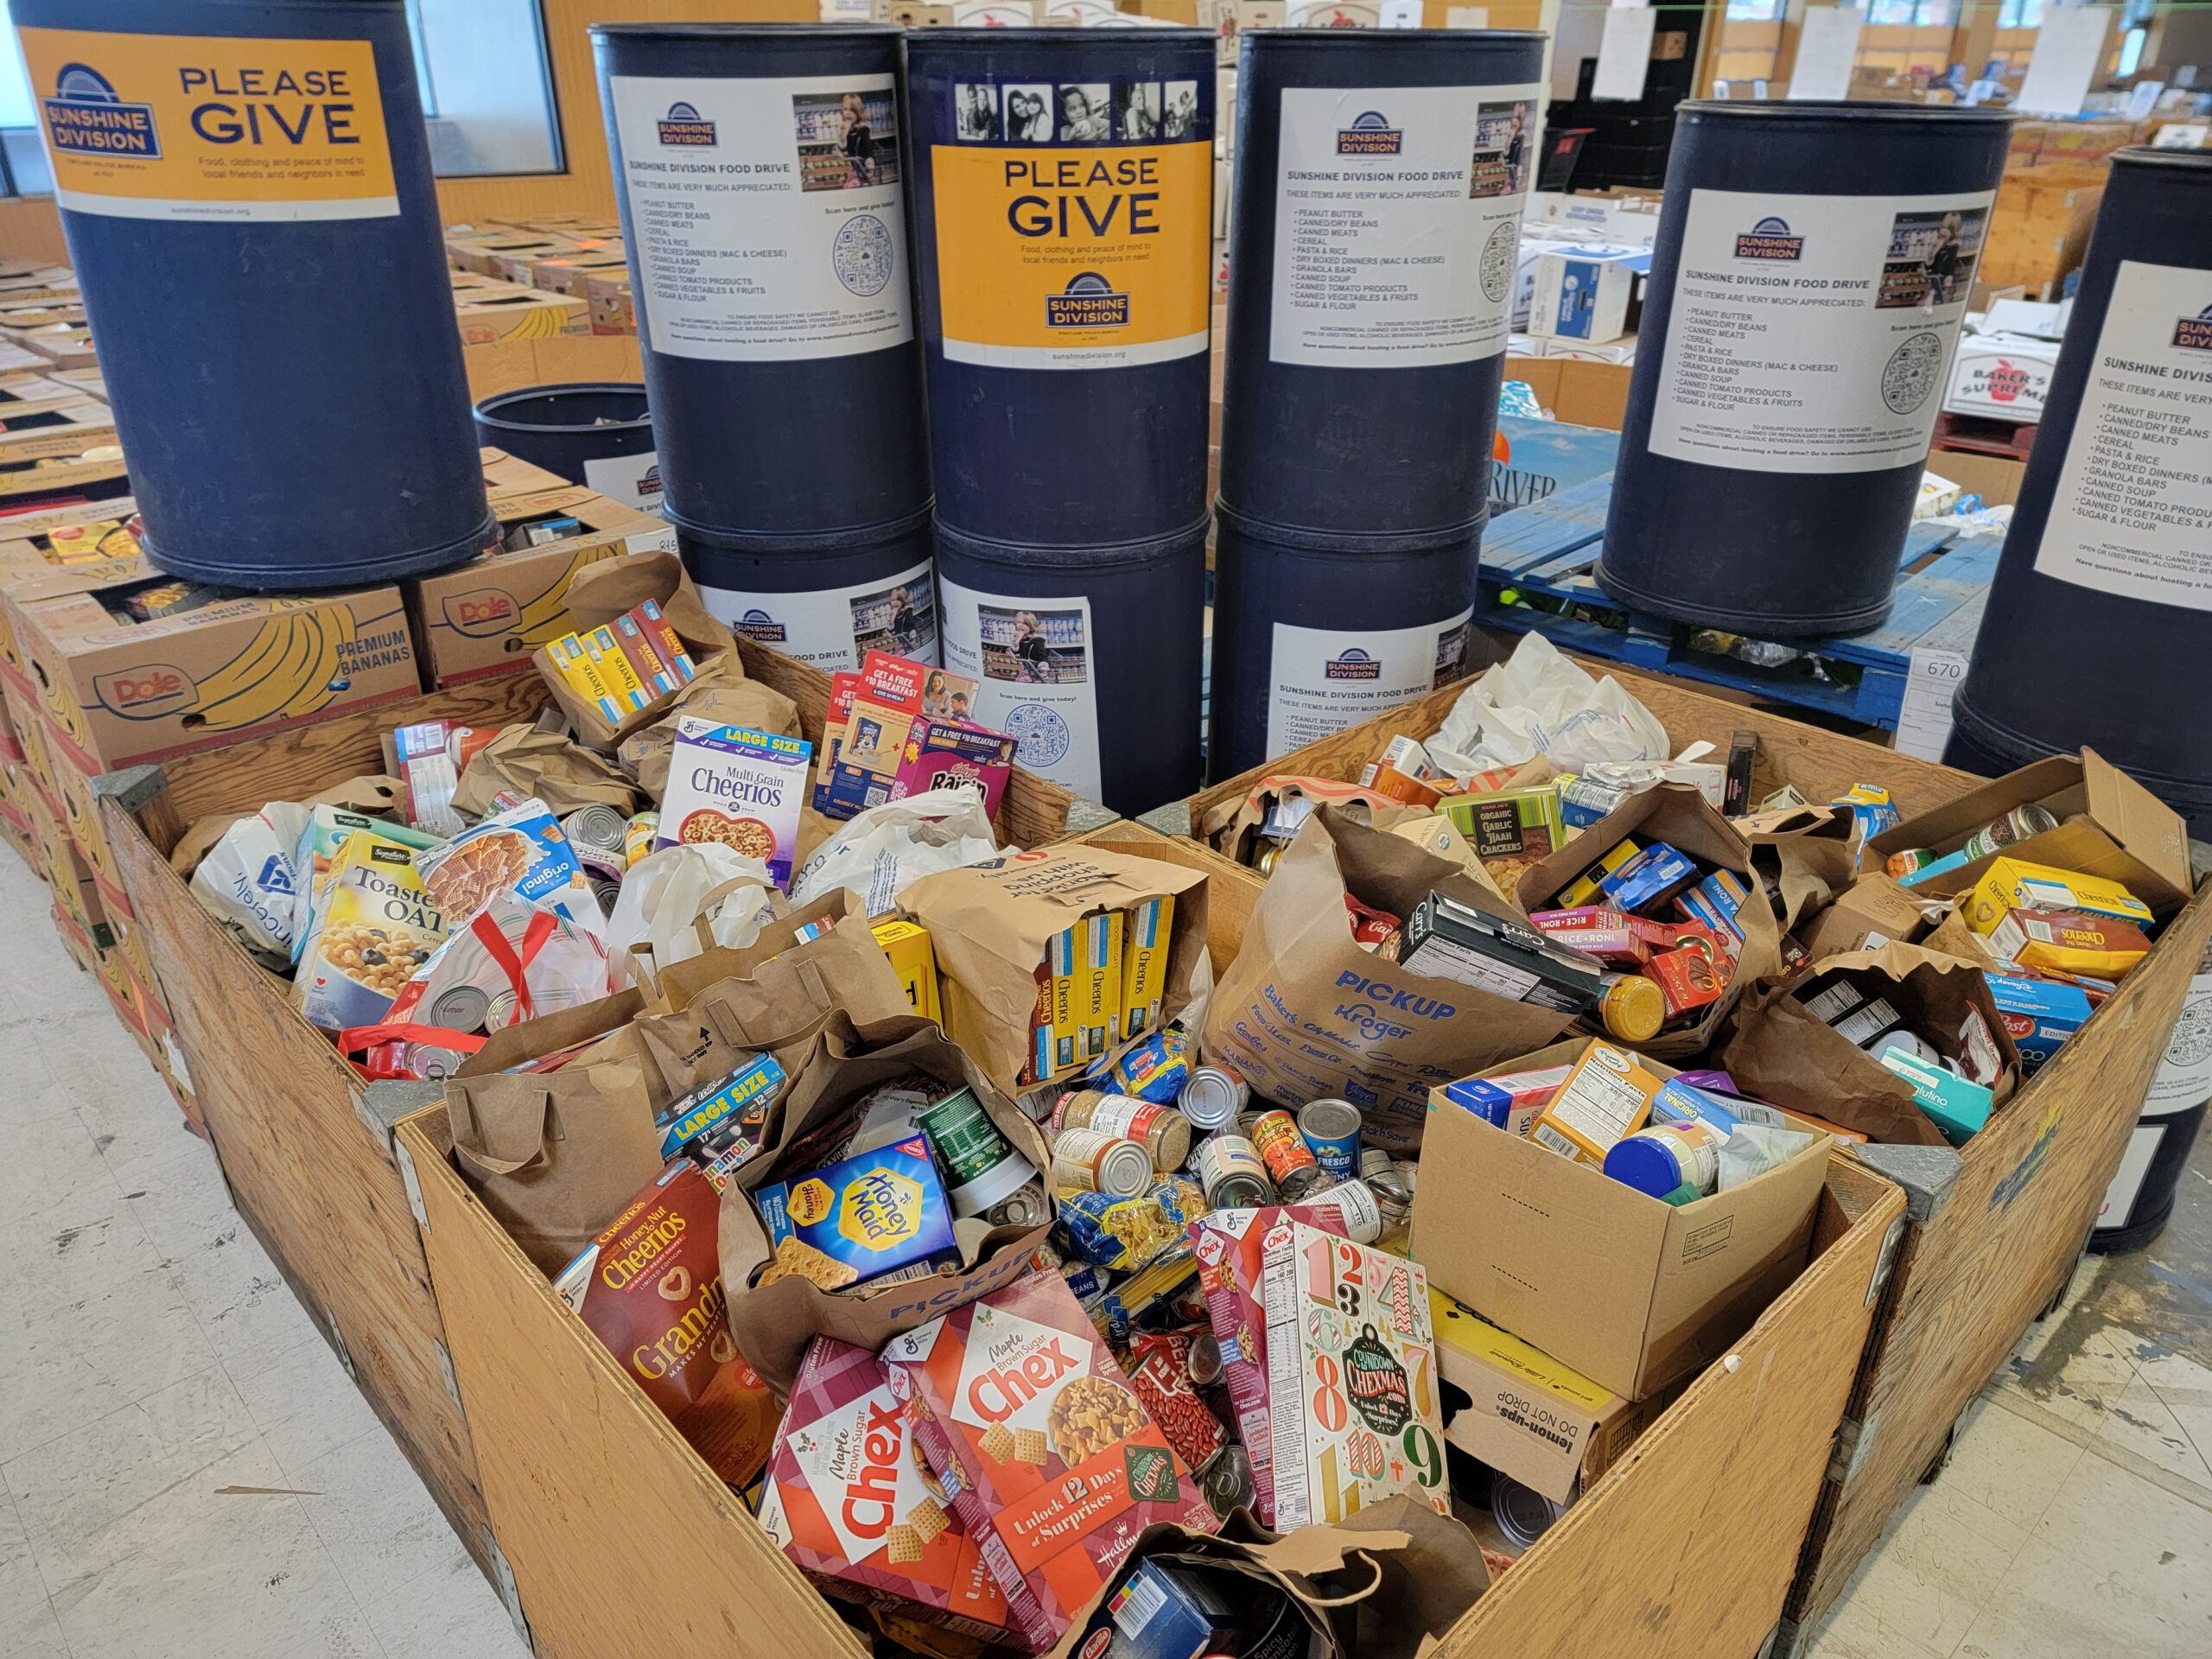 Canned and non-perishable food items in boxes and donation tubs